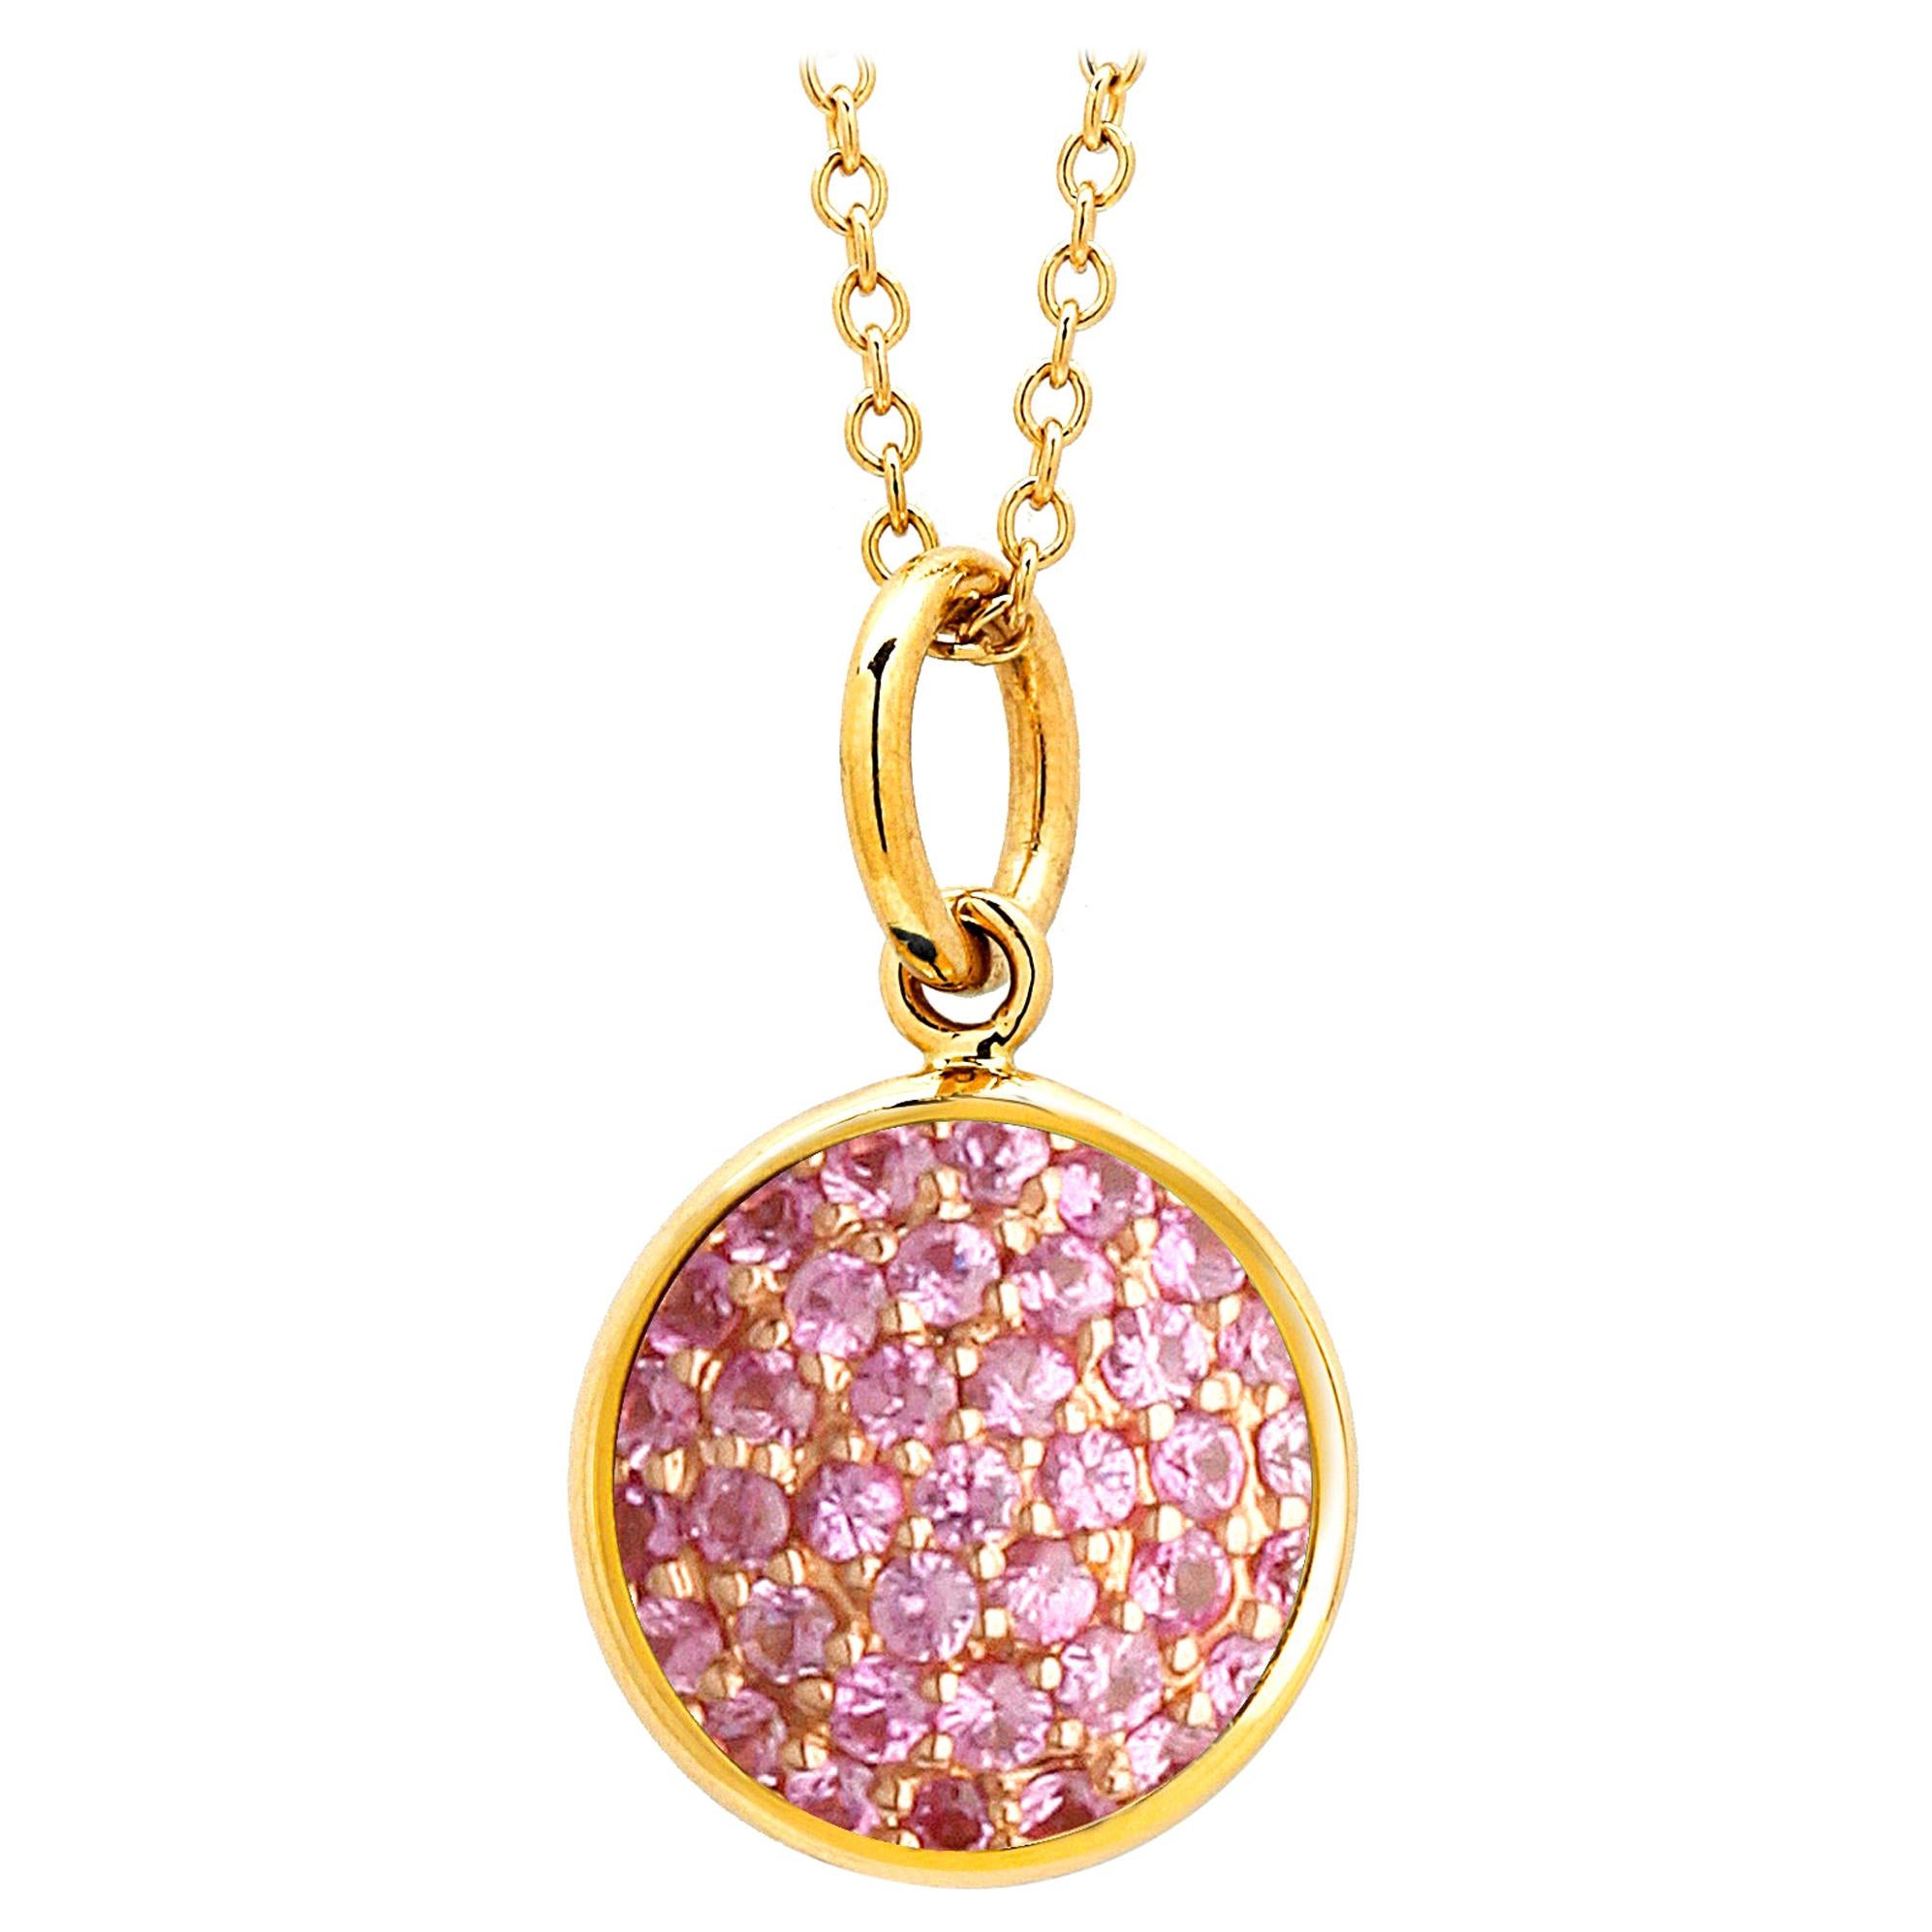 Syna Yellow Gold Charm Pendant with Pink Sapphires For Sale